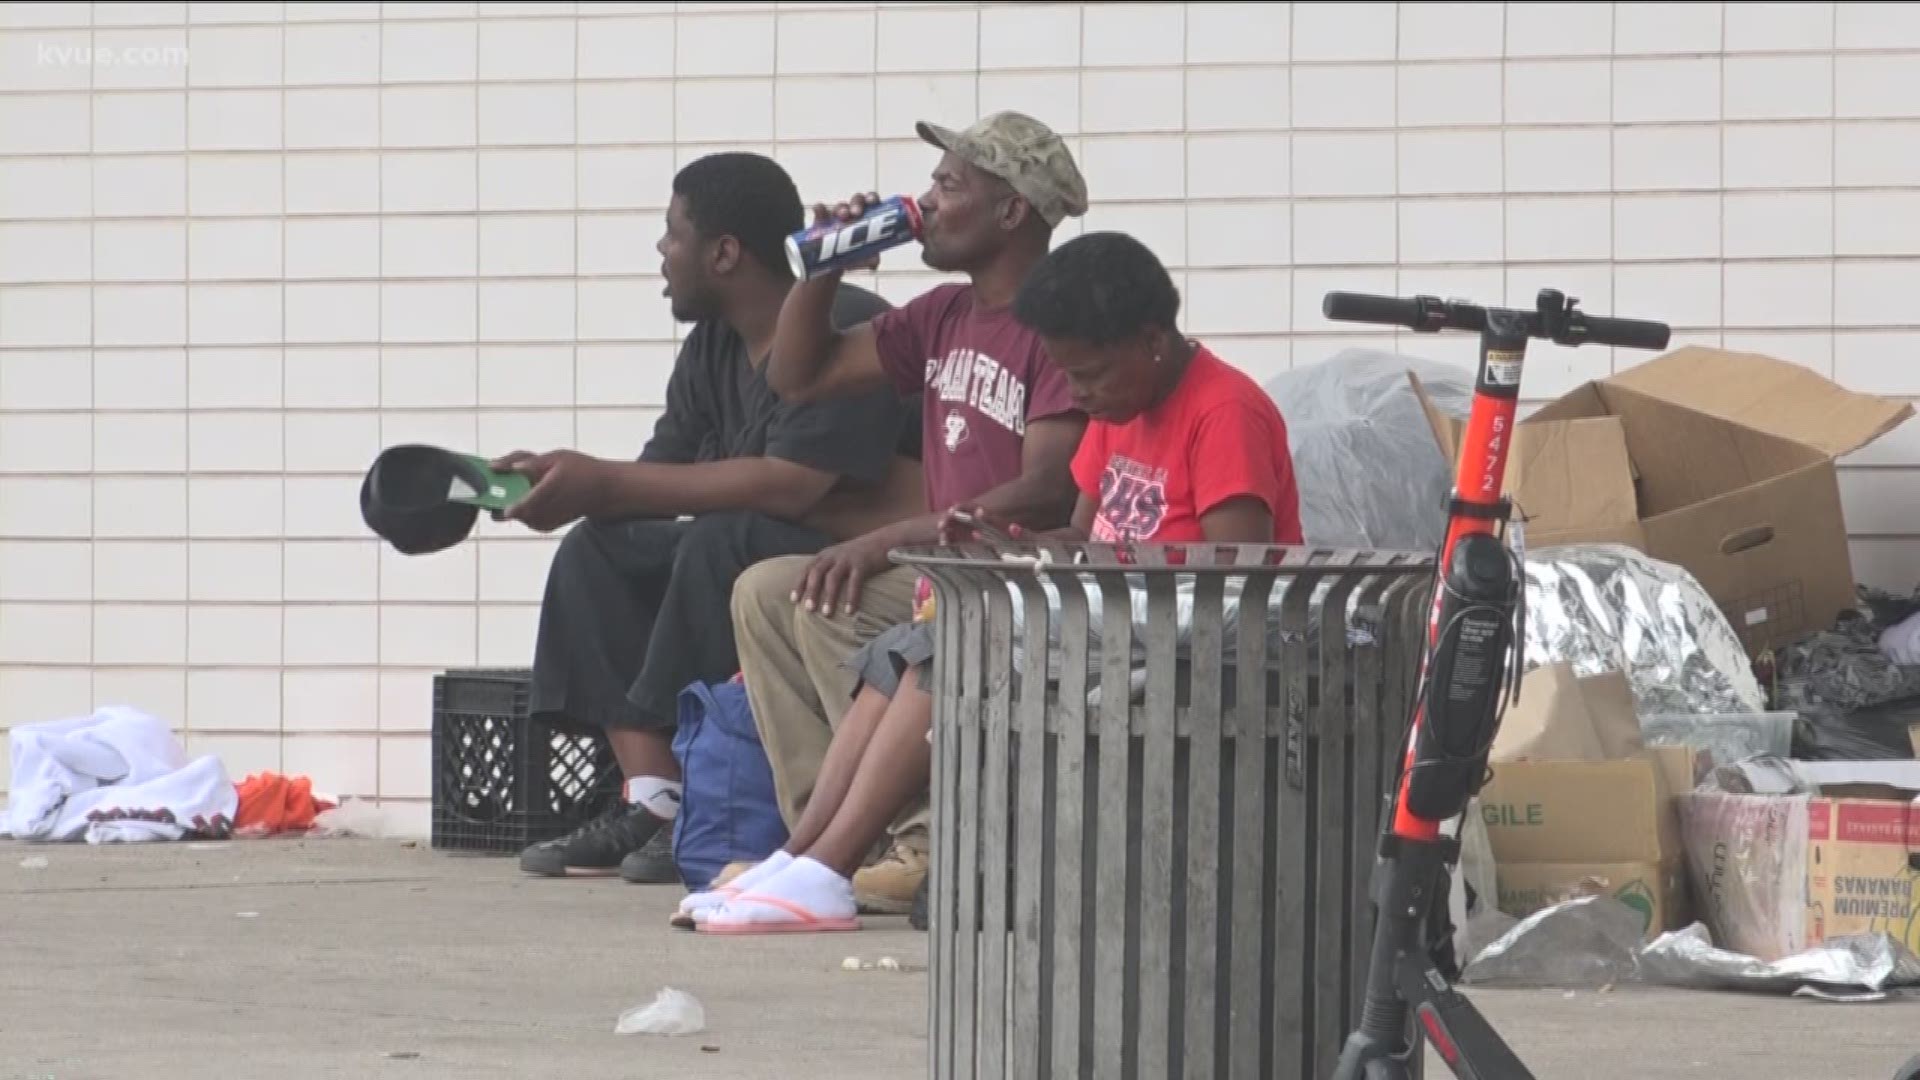 Between June 20 and August 29, Austin 311 has gotten 919 calls about homeless people in Austin.